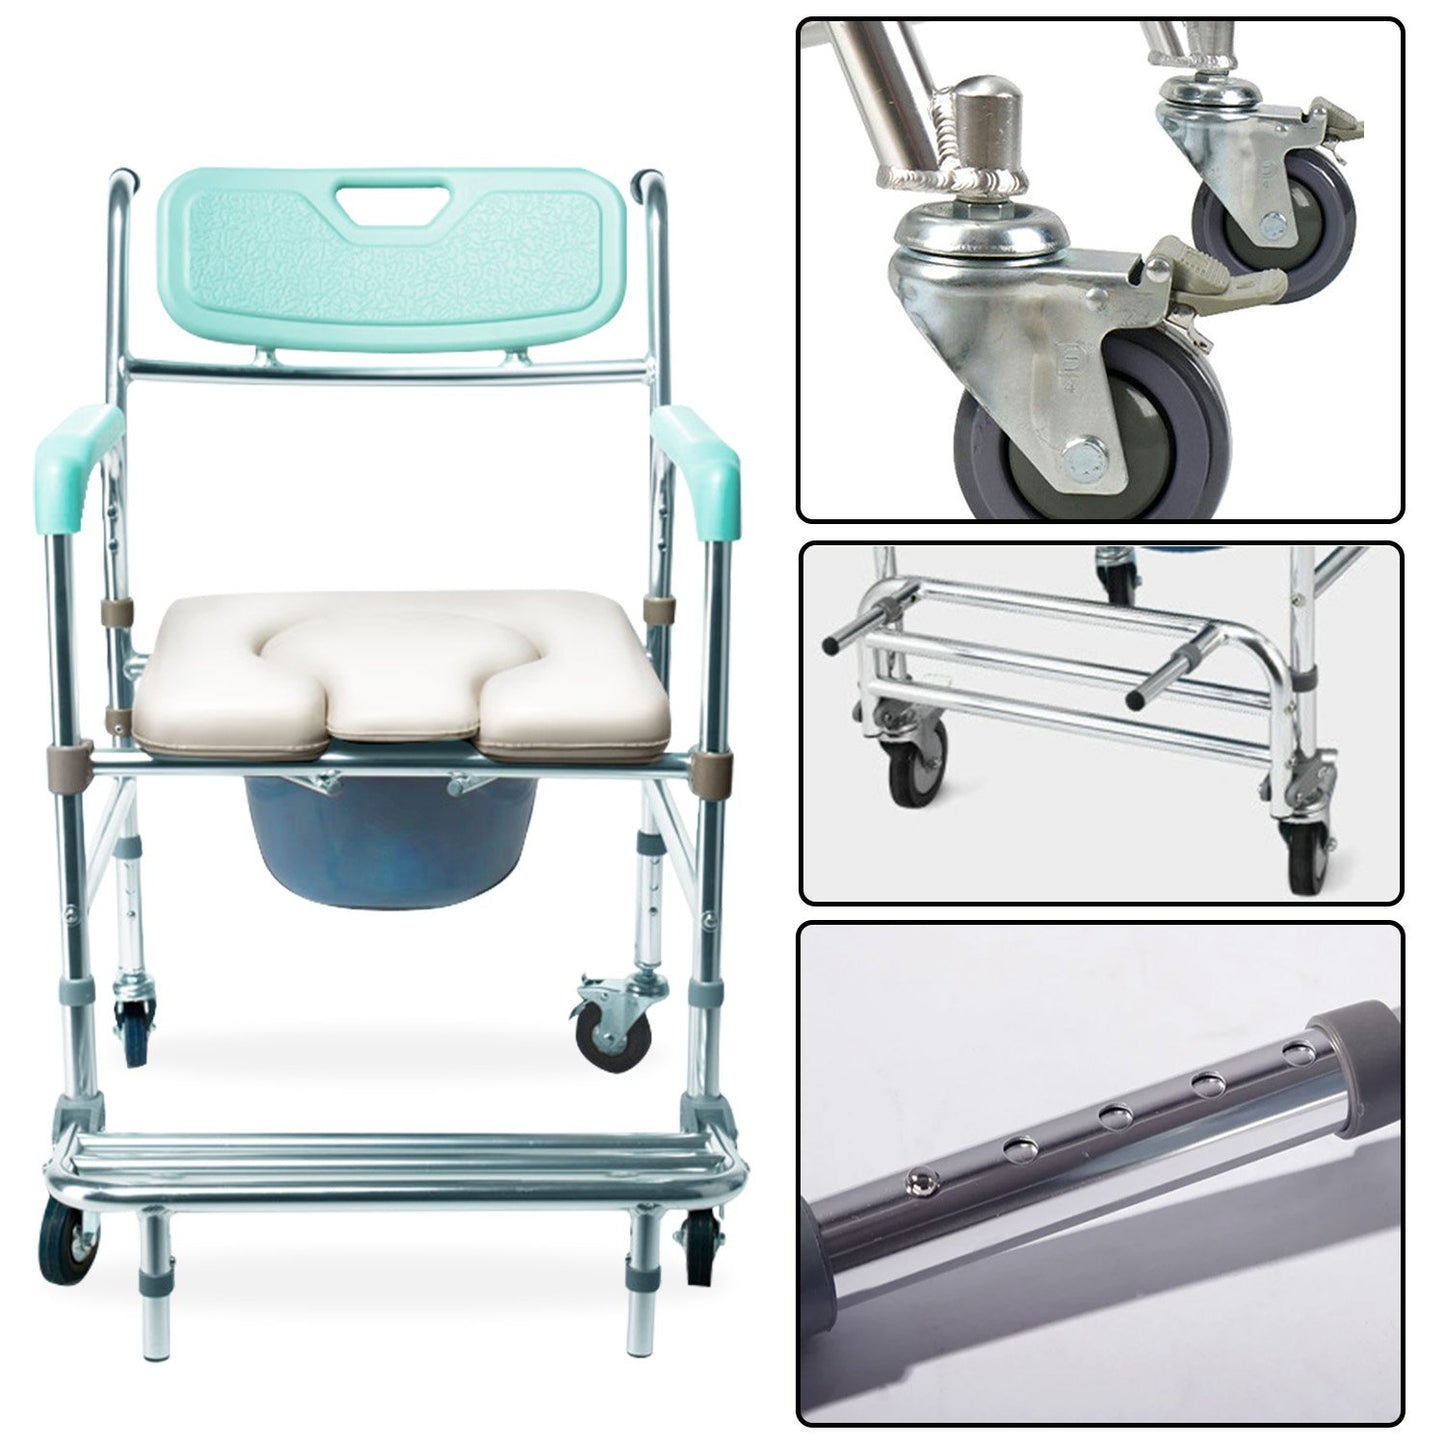 Orthonica Commode Chair With Castors Aluminium Frame Footrest Soft Push Handles